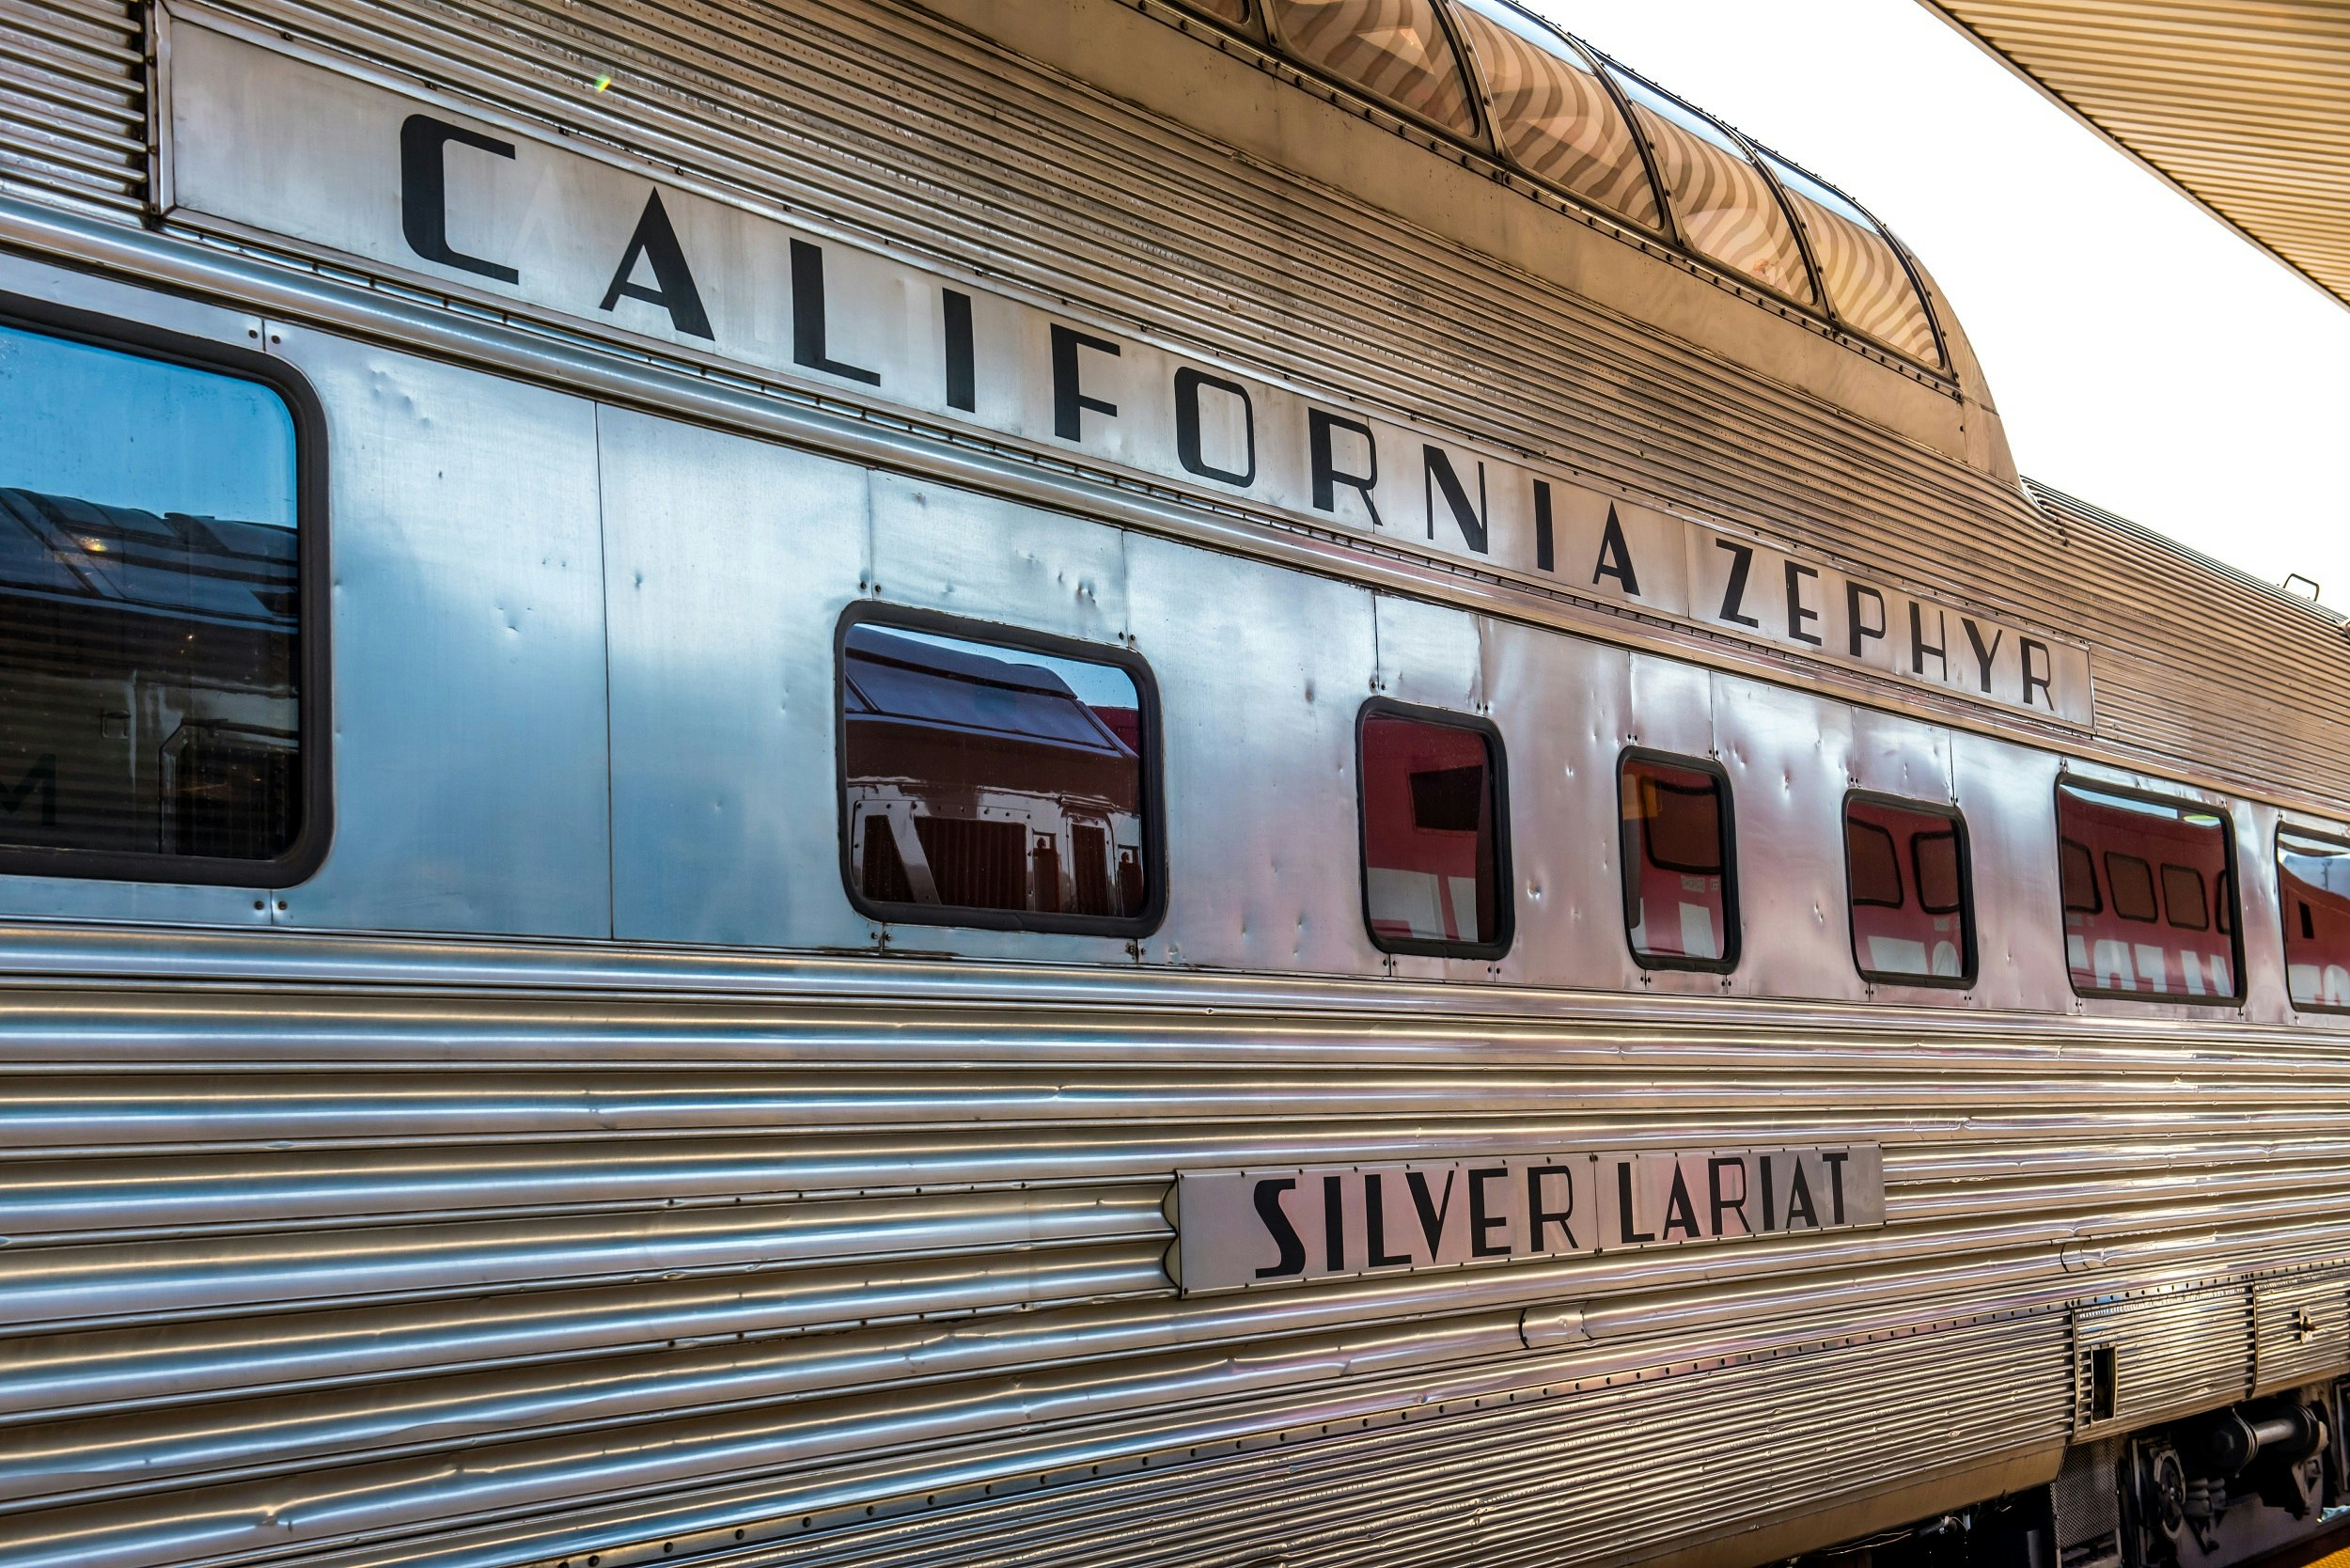 A silver train car with a glass rooftop viewing area sits at a station platform; emblazoned on the side is California Zephyr and Silver Lariat.